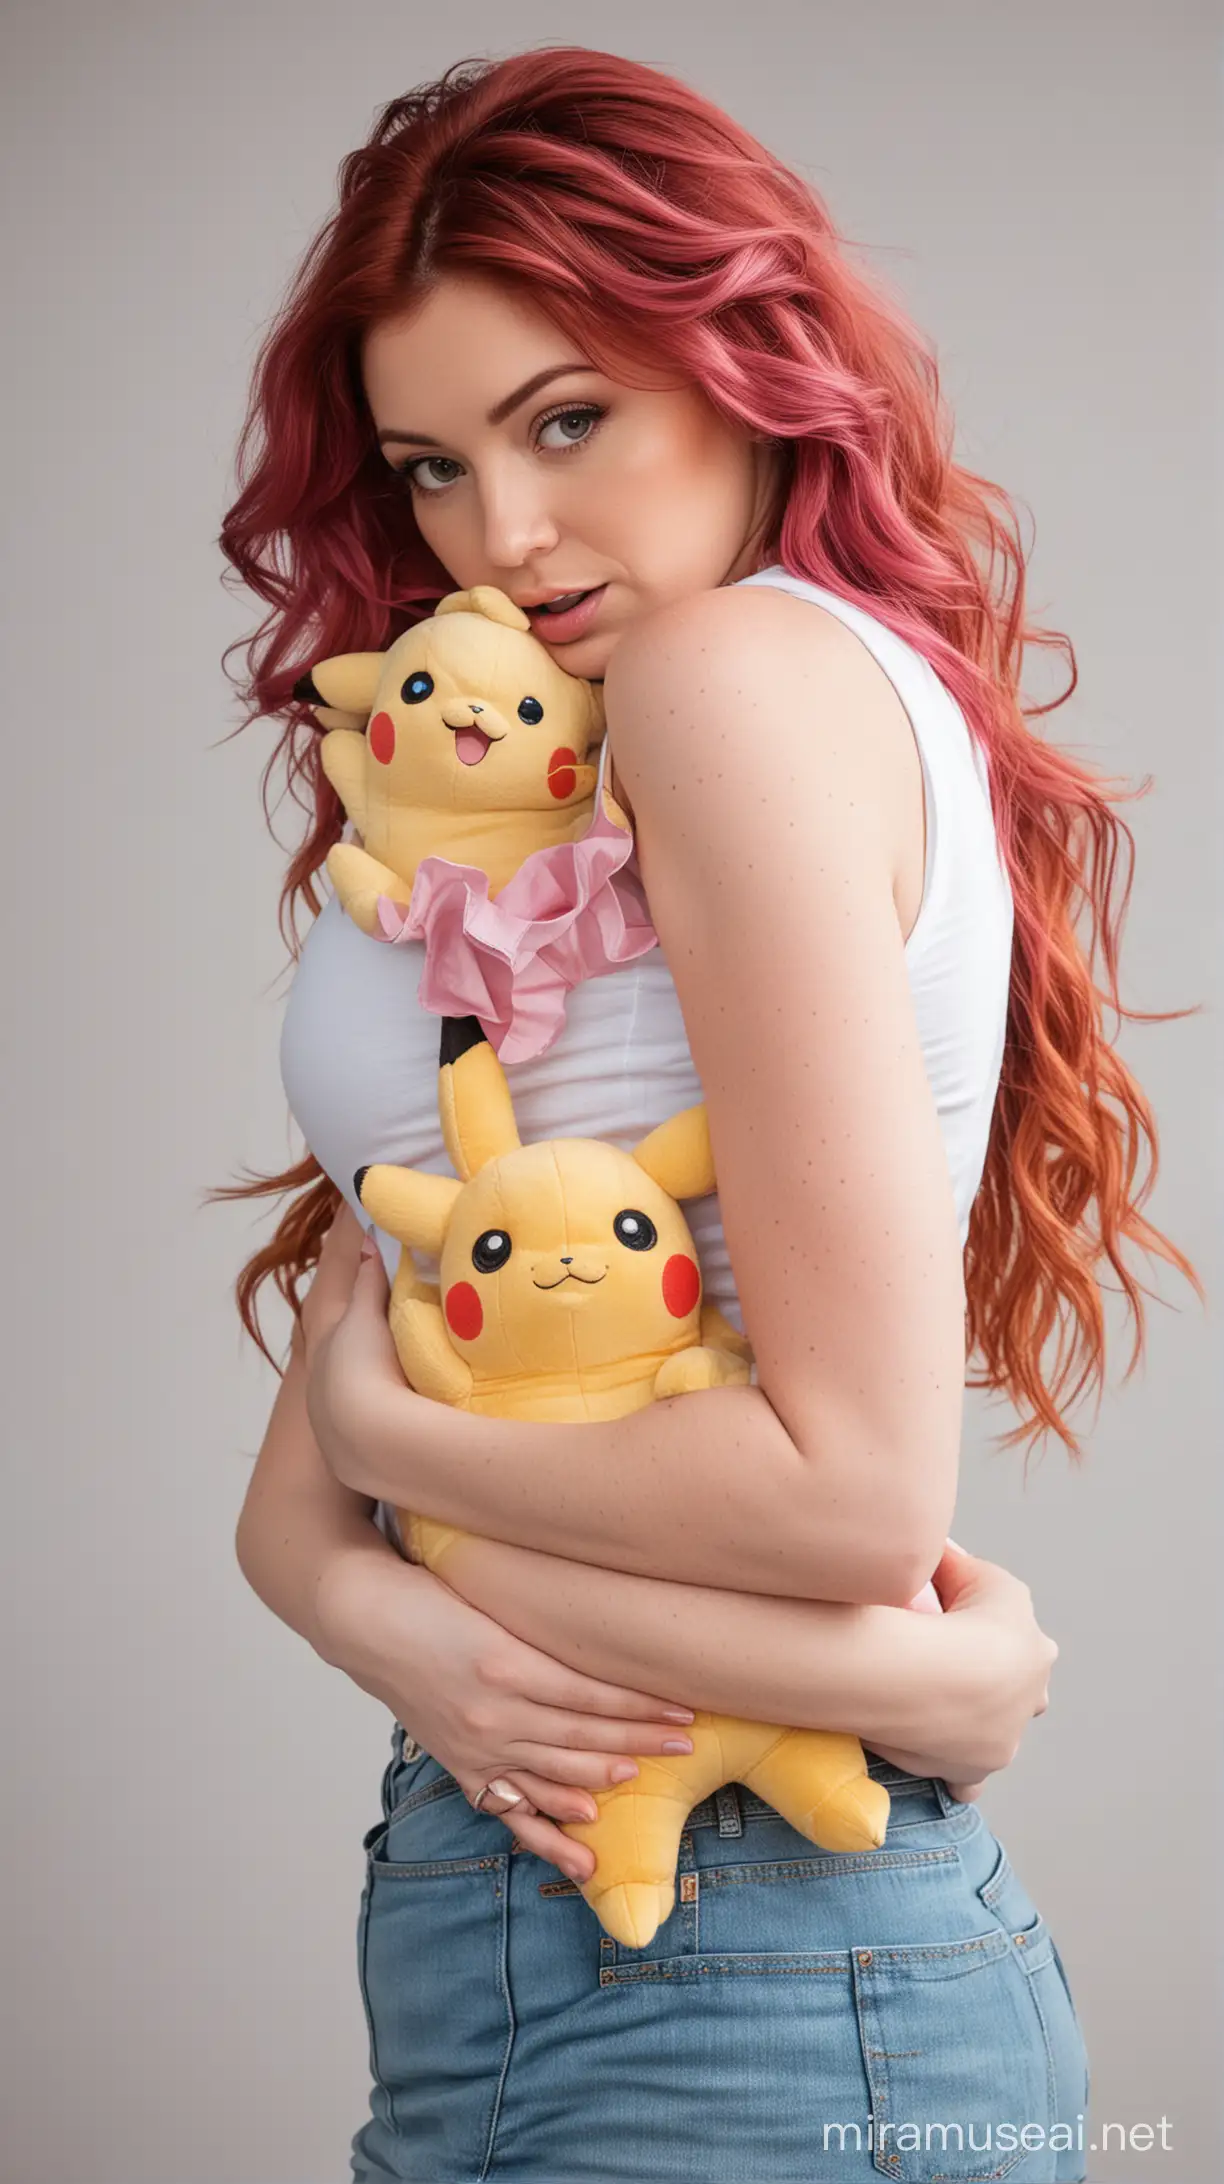 rear view of a beautiful woman with wavy auburn hair with pink highlights. She wearing a white sleeveless shirt and jeans. She is angry. She both hands around the neck of a life sized pikachu plushie, choking it in a fit of anger.